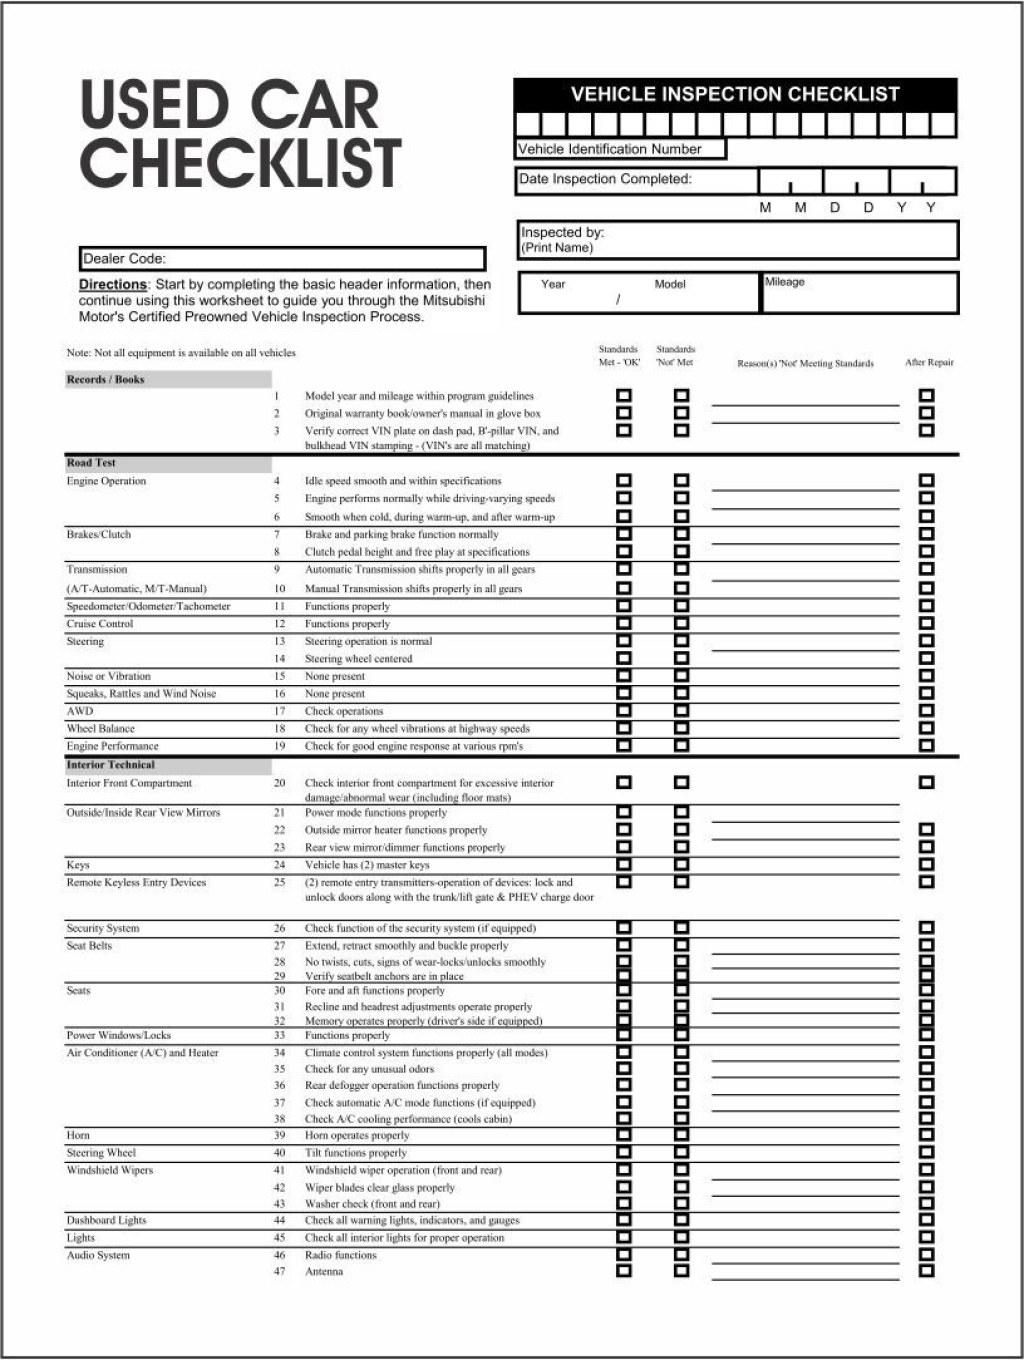 Picture of: Used+Vehicle+Inspection+Checklist+Form  Vehicle inspection